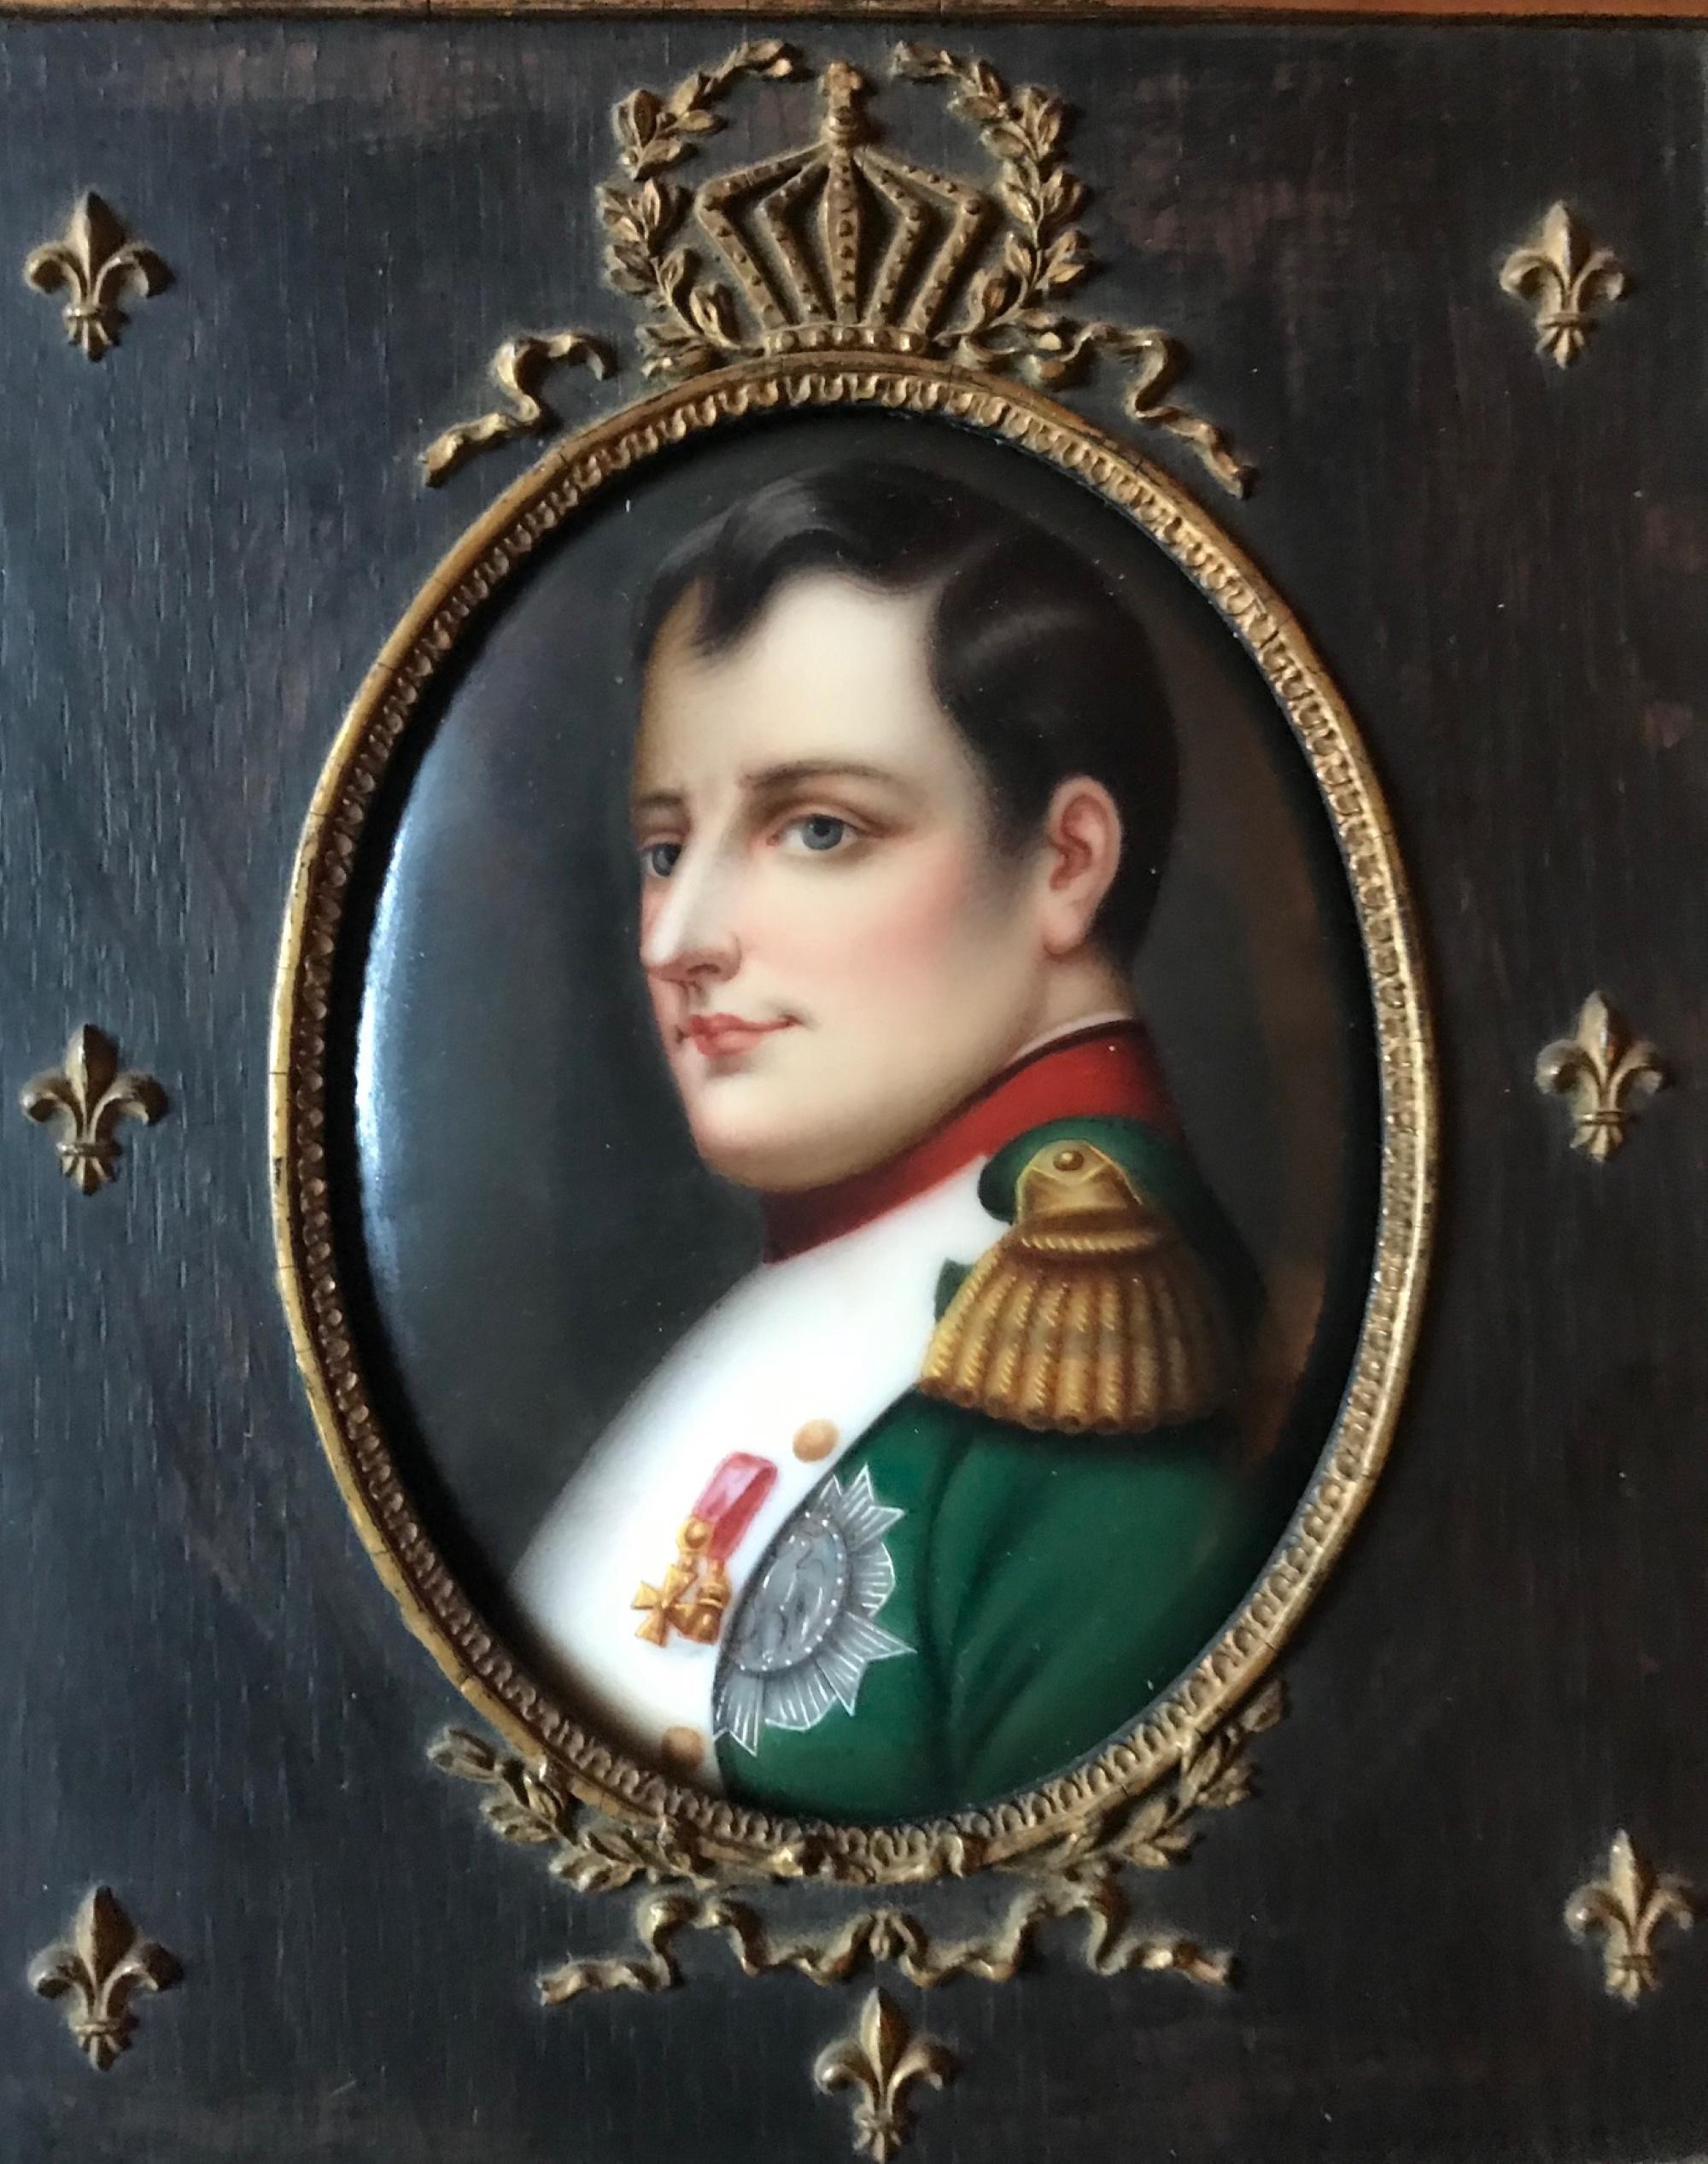 19th century French miniature of Napoleon I after Paul Delaroche in period frame

This is a miniature portrait painting on porcelain from the late 19th century after the painting “Napoleon in His Office” by the artist Paul Delaroche. This Fine